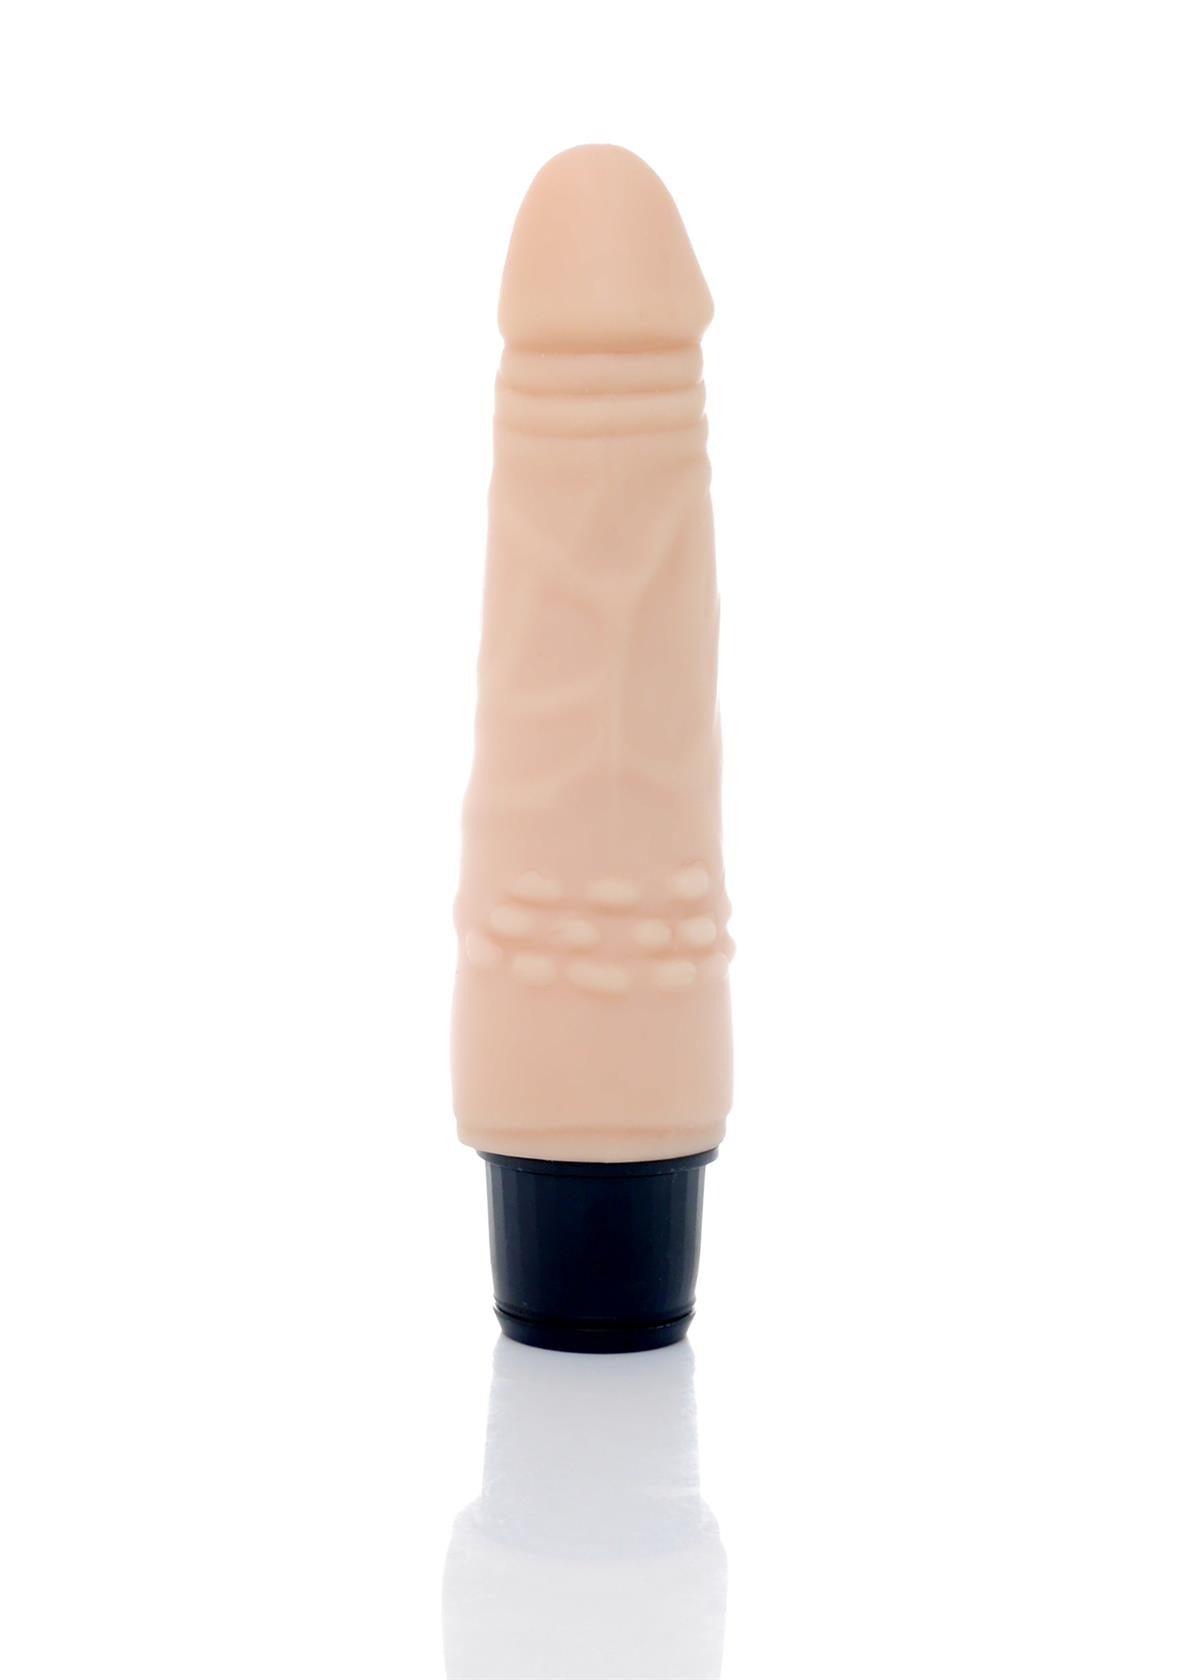 Bossoftoys - Storm 12 Function Realistic vibrator - Cyber leather - Extra ordinary Flexible Material - Flesh - 18,5 cm - 44-00003